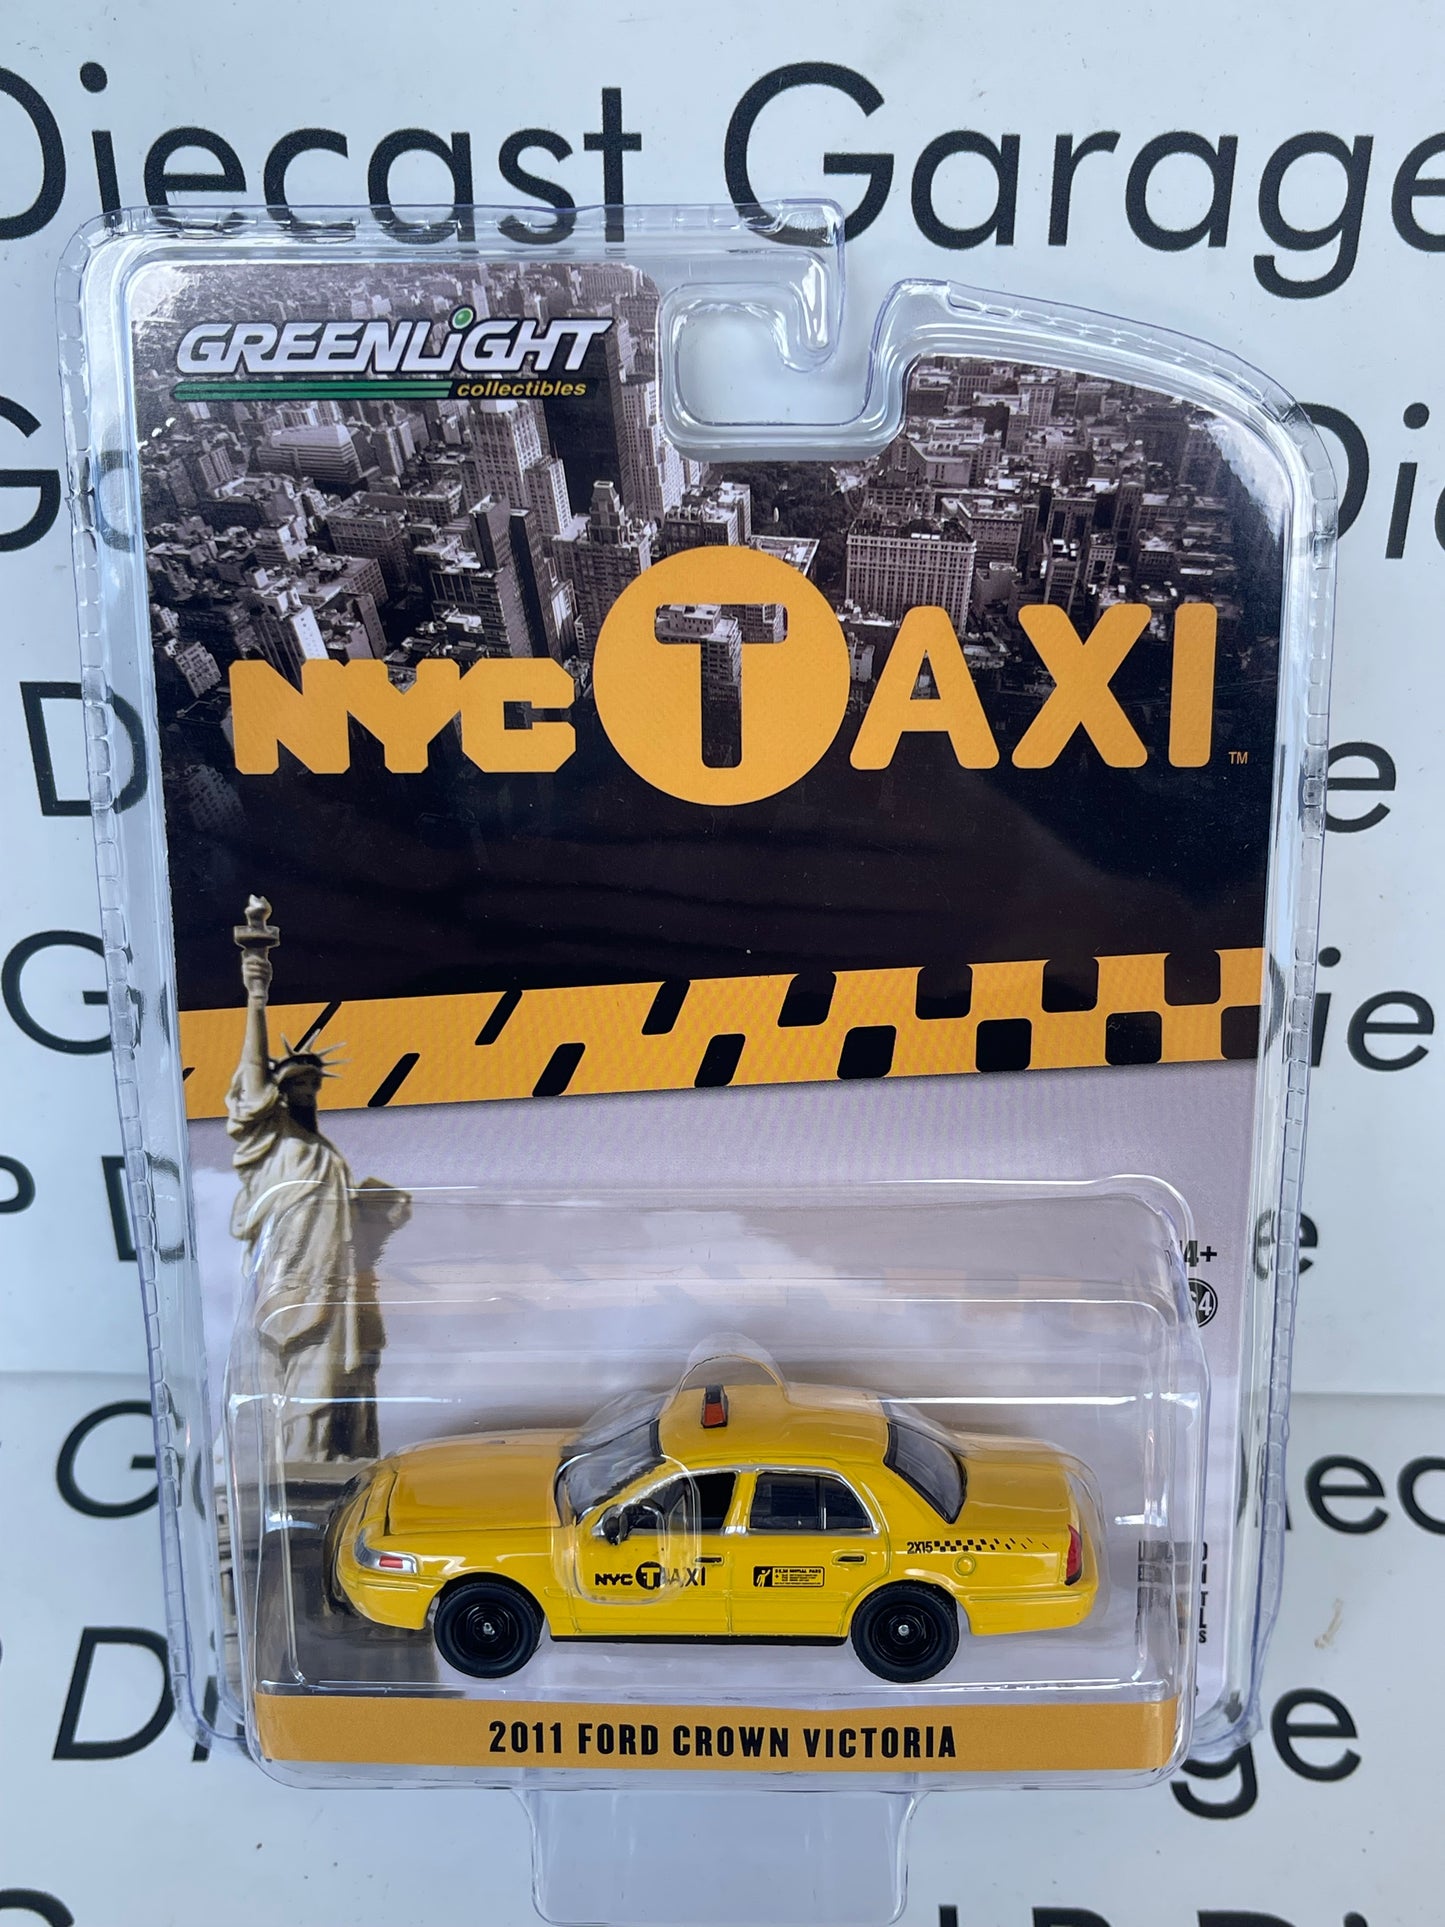 GREENLIGHT 2011 Ford Crown Victoria NYC Taxi New York City 1:64 Diecast